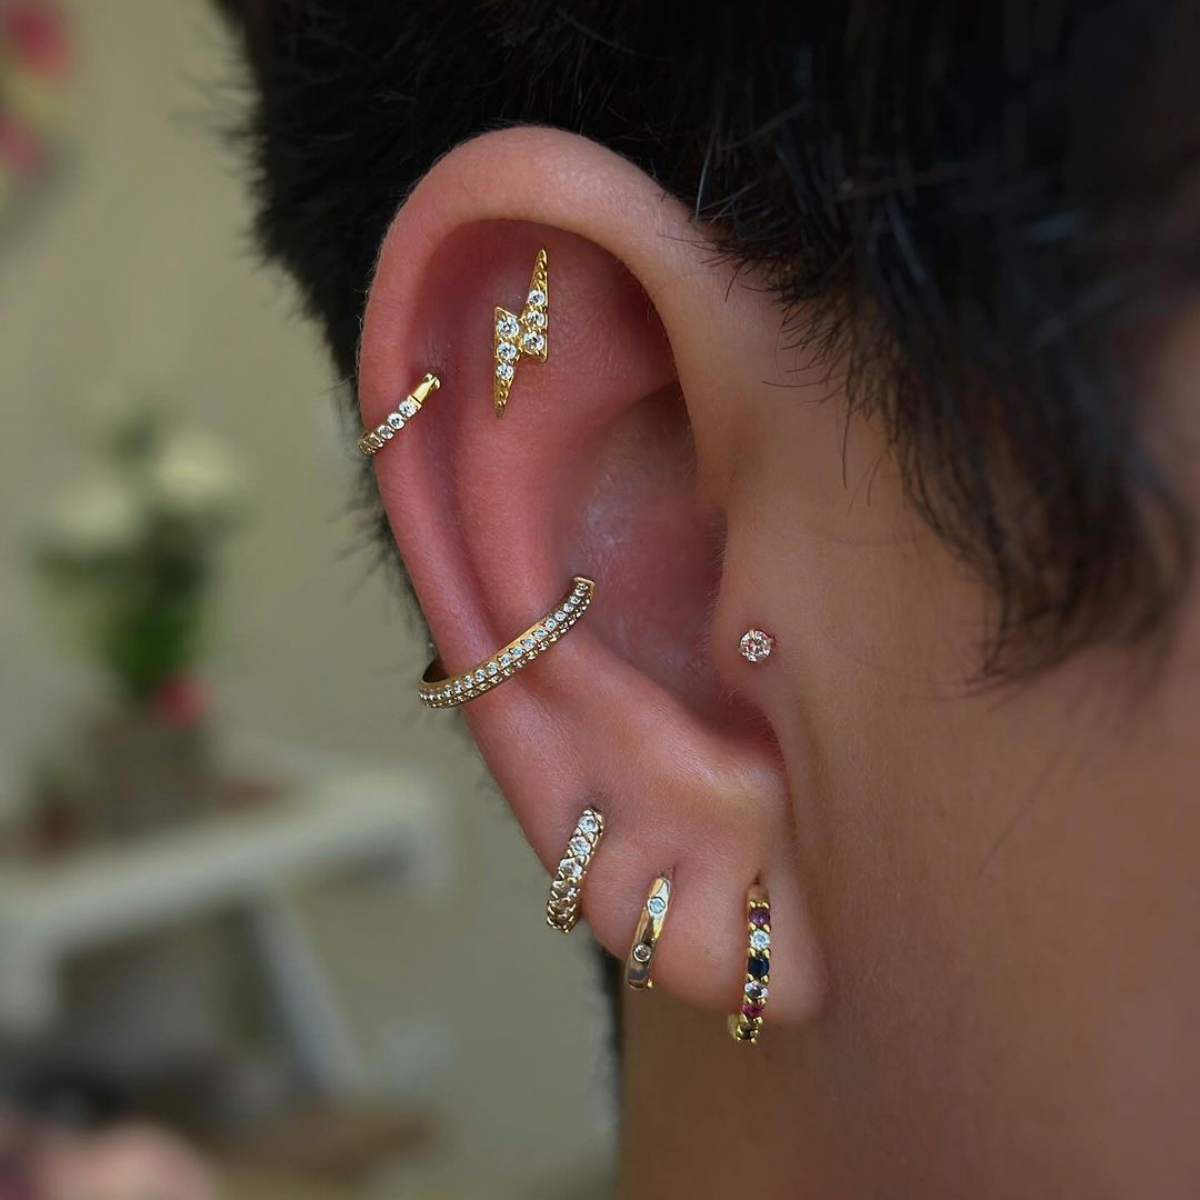 gemed tragus piercing and earring design